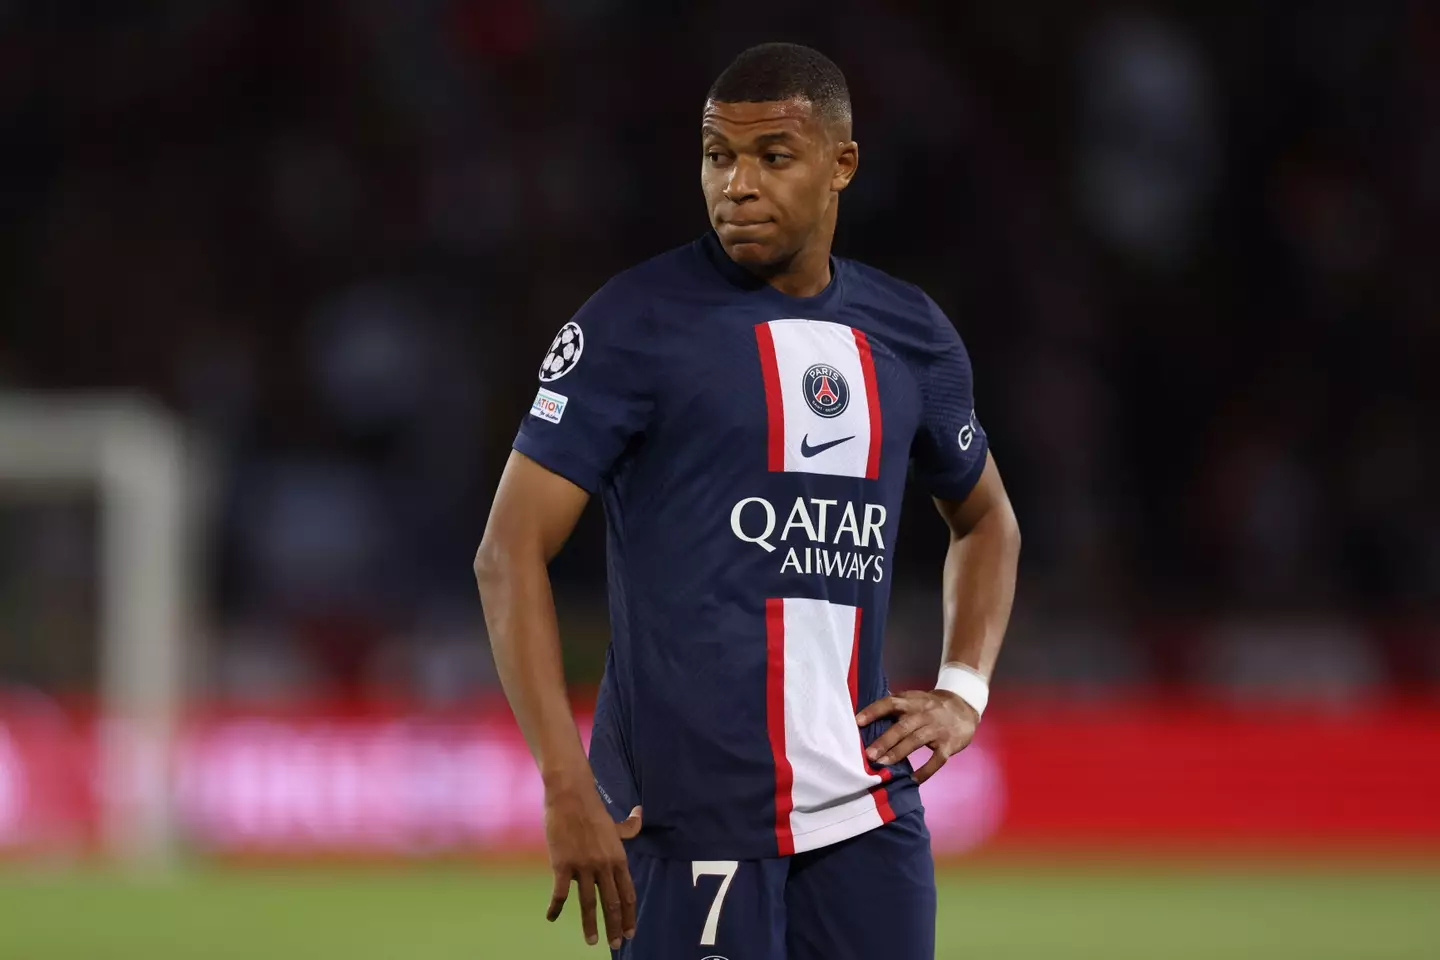 Mbappe has been linked with Liverpool (Image: Alamy)